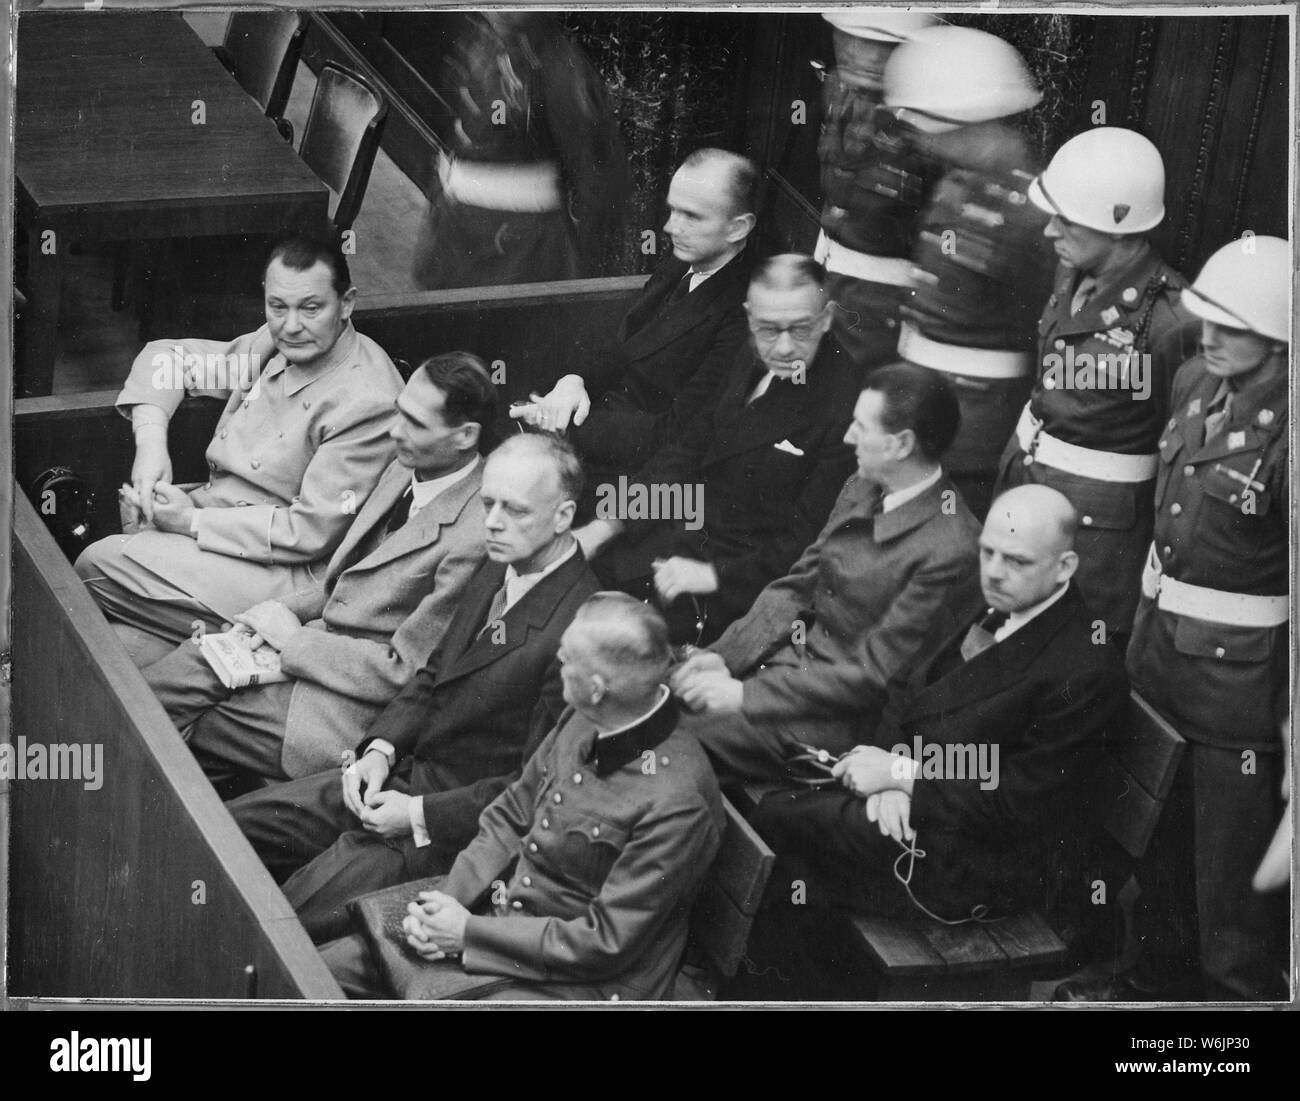 Nuremberg Trials. Defendants in their dock; Goering, Hess, von Ribbentrop, and Keitel in front row, circa 1945-1946., ca. 1945 - ca. 1946; General notes:  Use War and Conflict Number 1297 when ordering a reproduction or requesting information about this image. Stock Photo